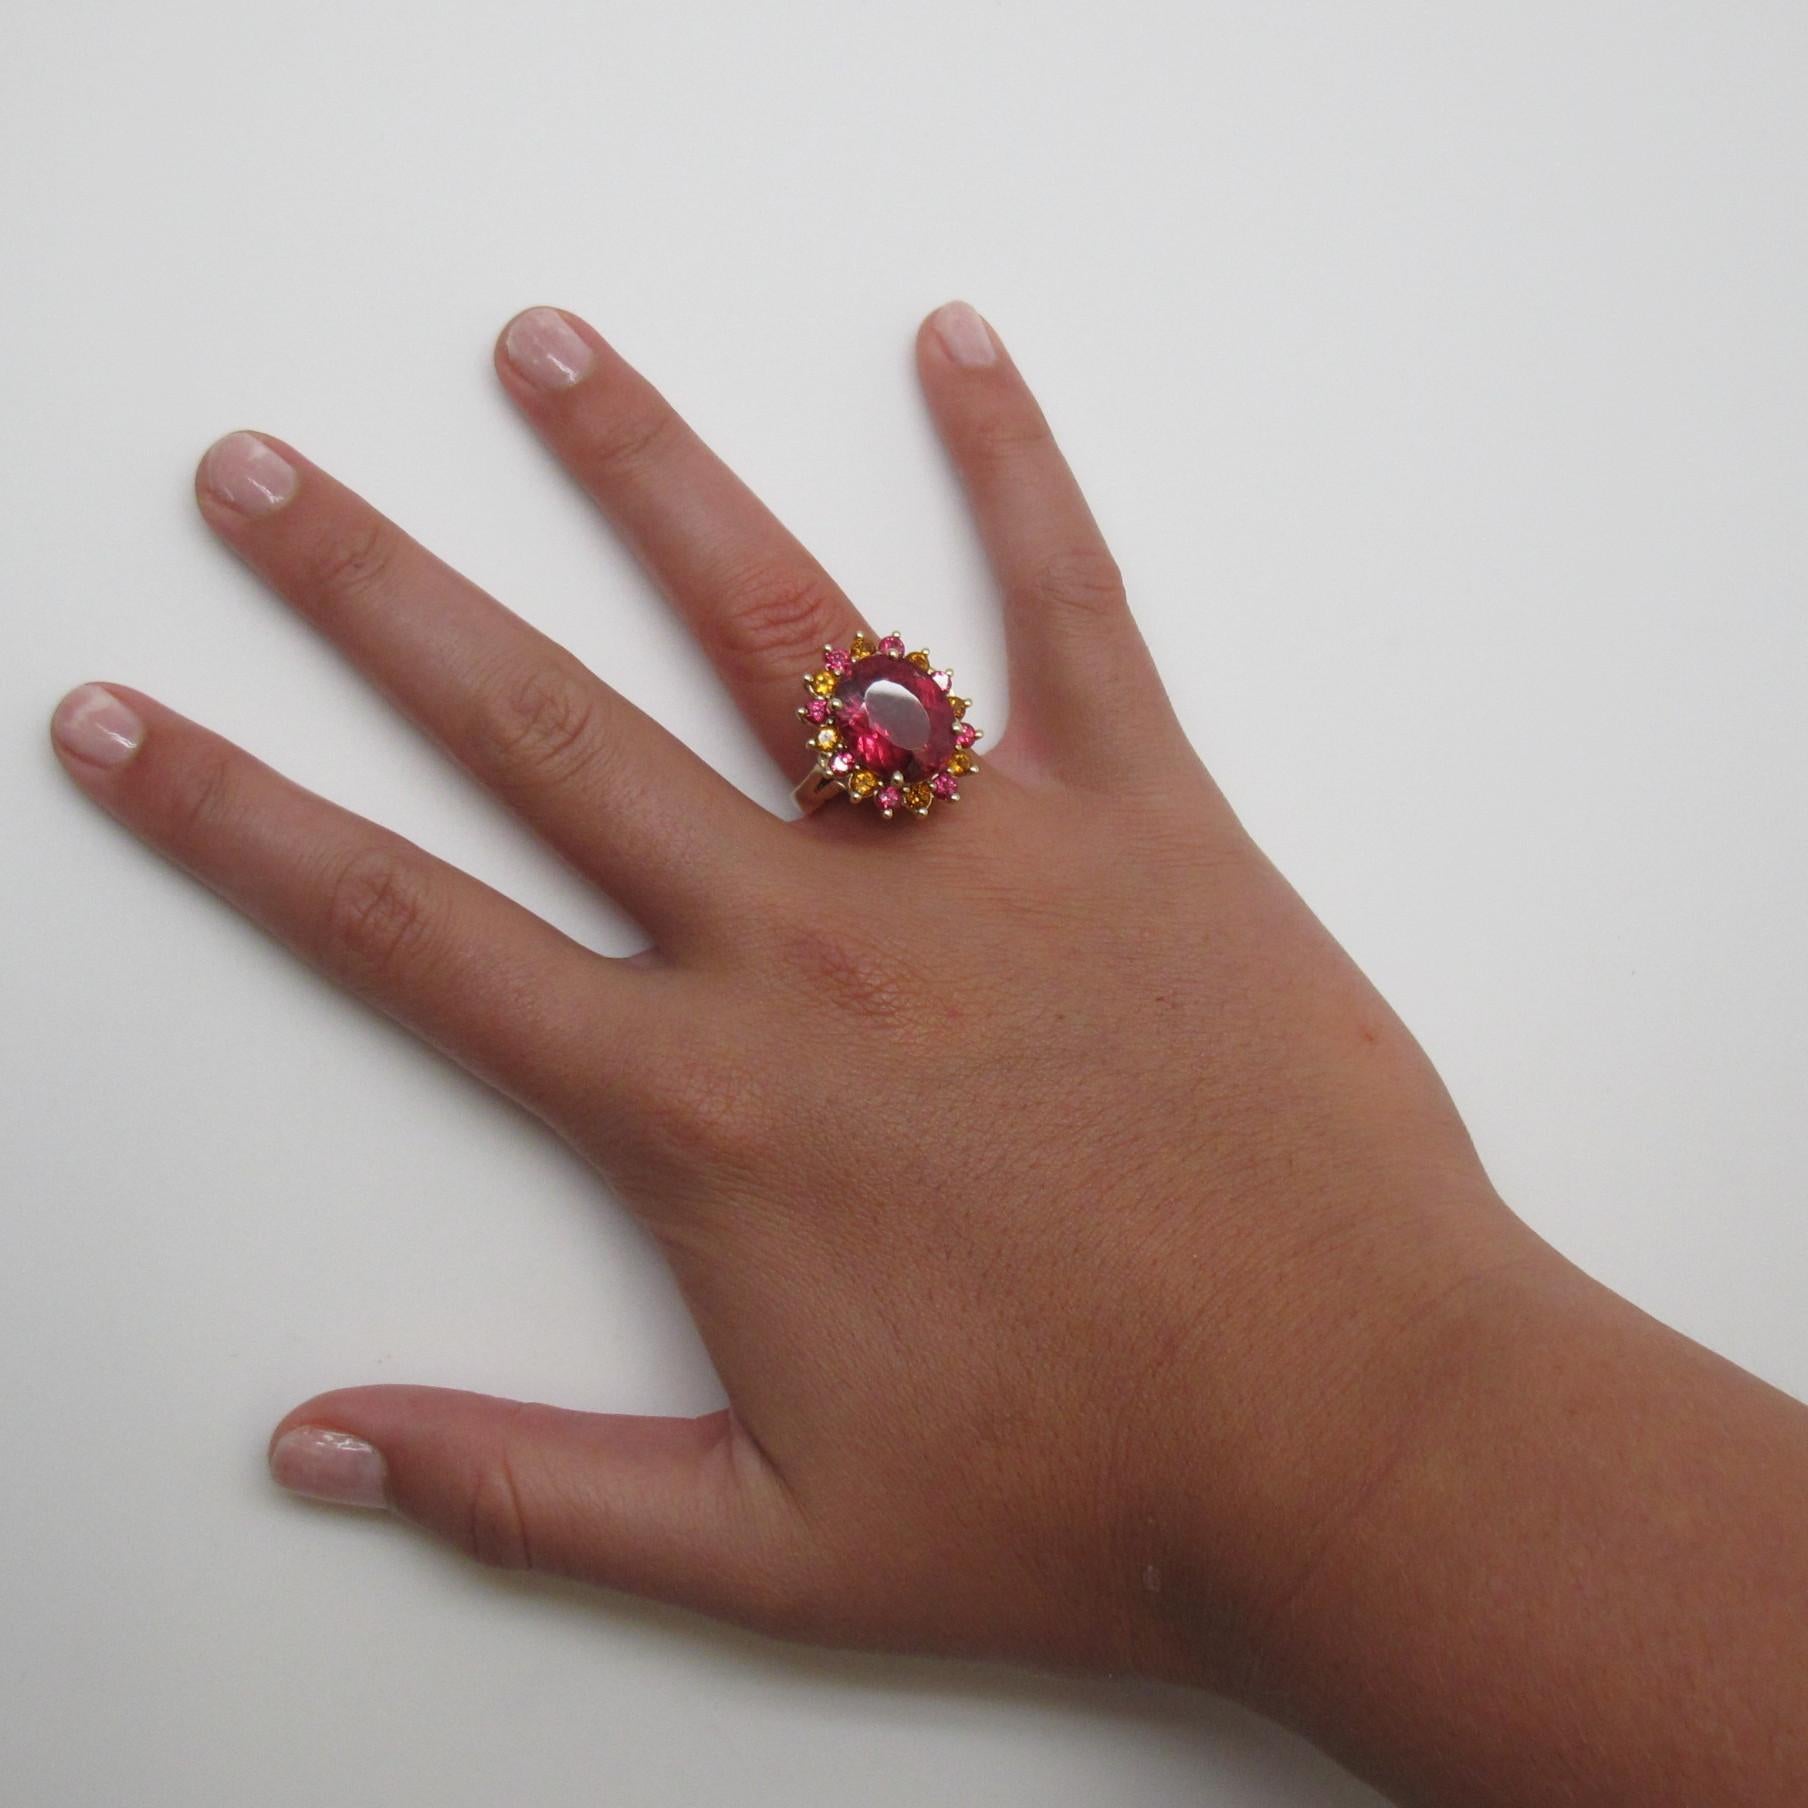 This bold and large cocktail ring is a show stopper! Handcrafted with care in 14k yellow gold, this happy color pairing of gemstones is hard to ignore. It is sure to put a smile on your face!

 A large fucshia- pink tourmaline (16.7x12.9mm/9.71